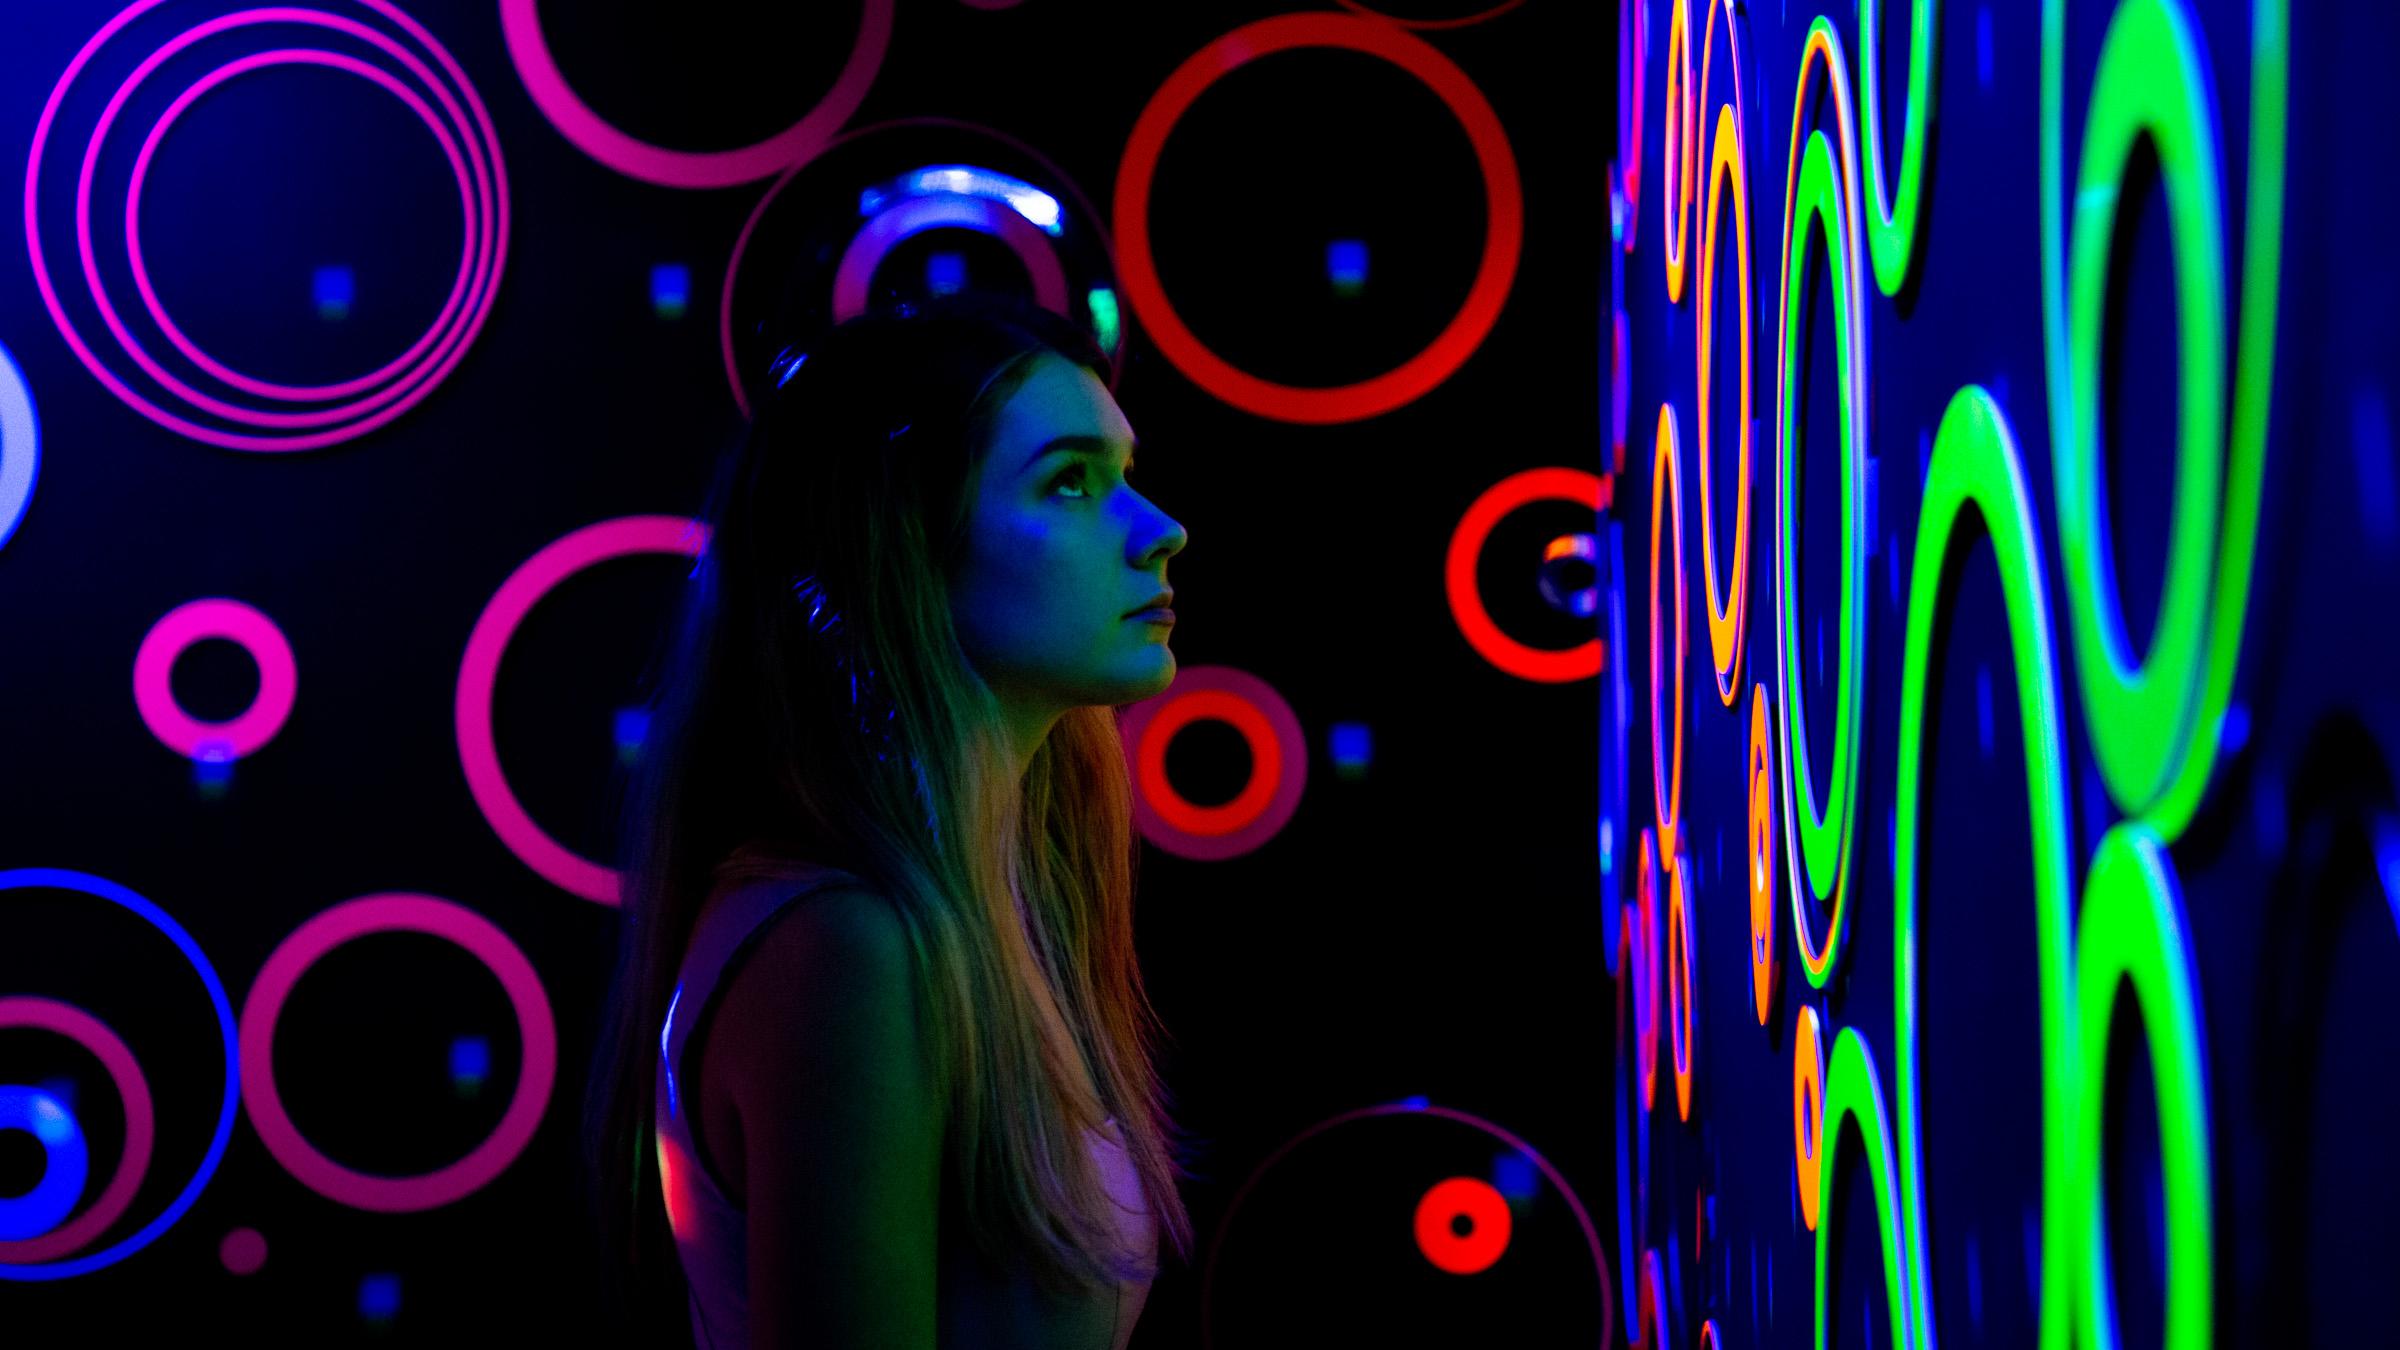 Young person in a dark room admiring glowing neon circles art on the wall